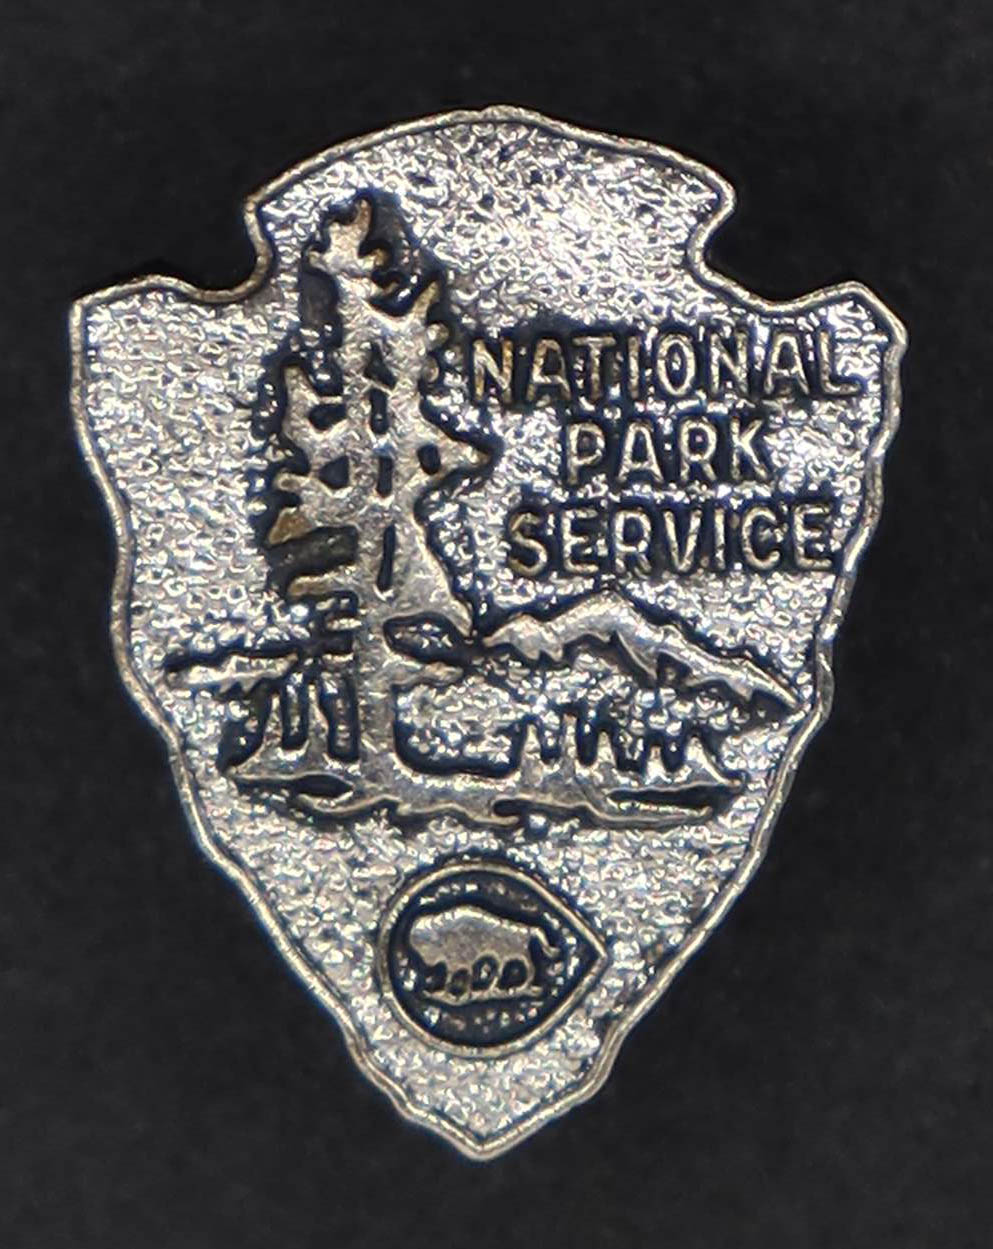 Silver arrowhead shaped pin with trees, mountains, bison, and words National Park Service.